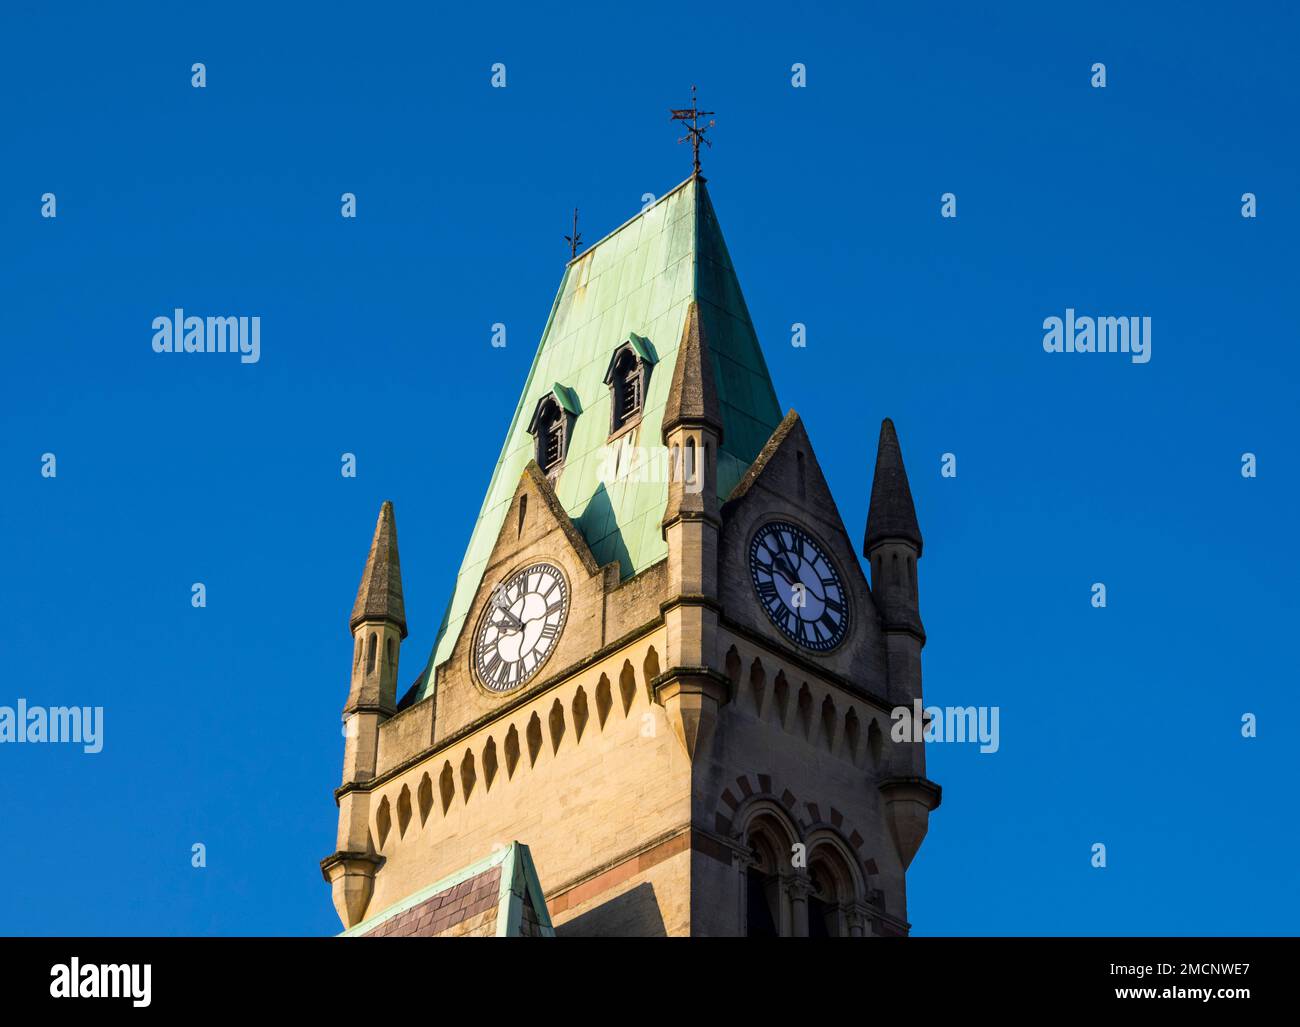 Tower of Winchester Guildhall, Winchester, Hampshire, England, Großbritannien, GB. Stockfoto